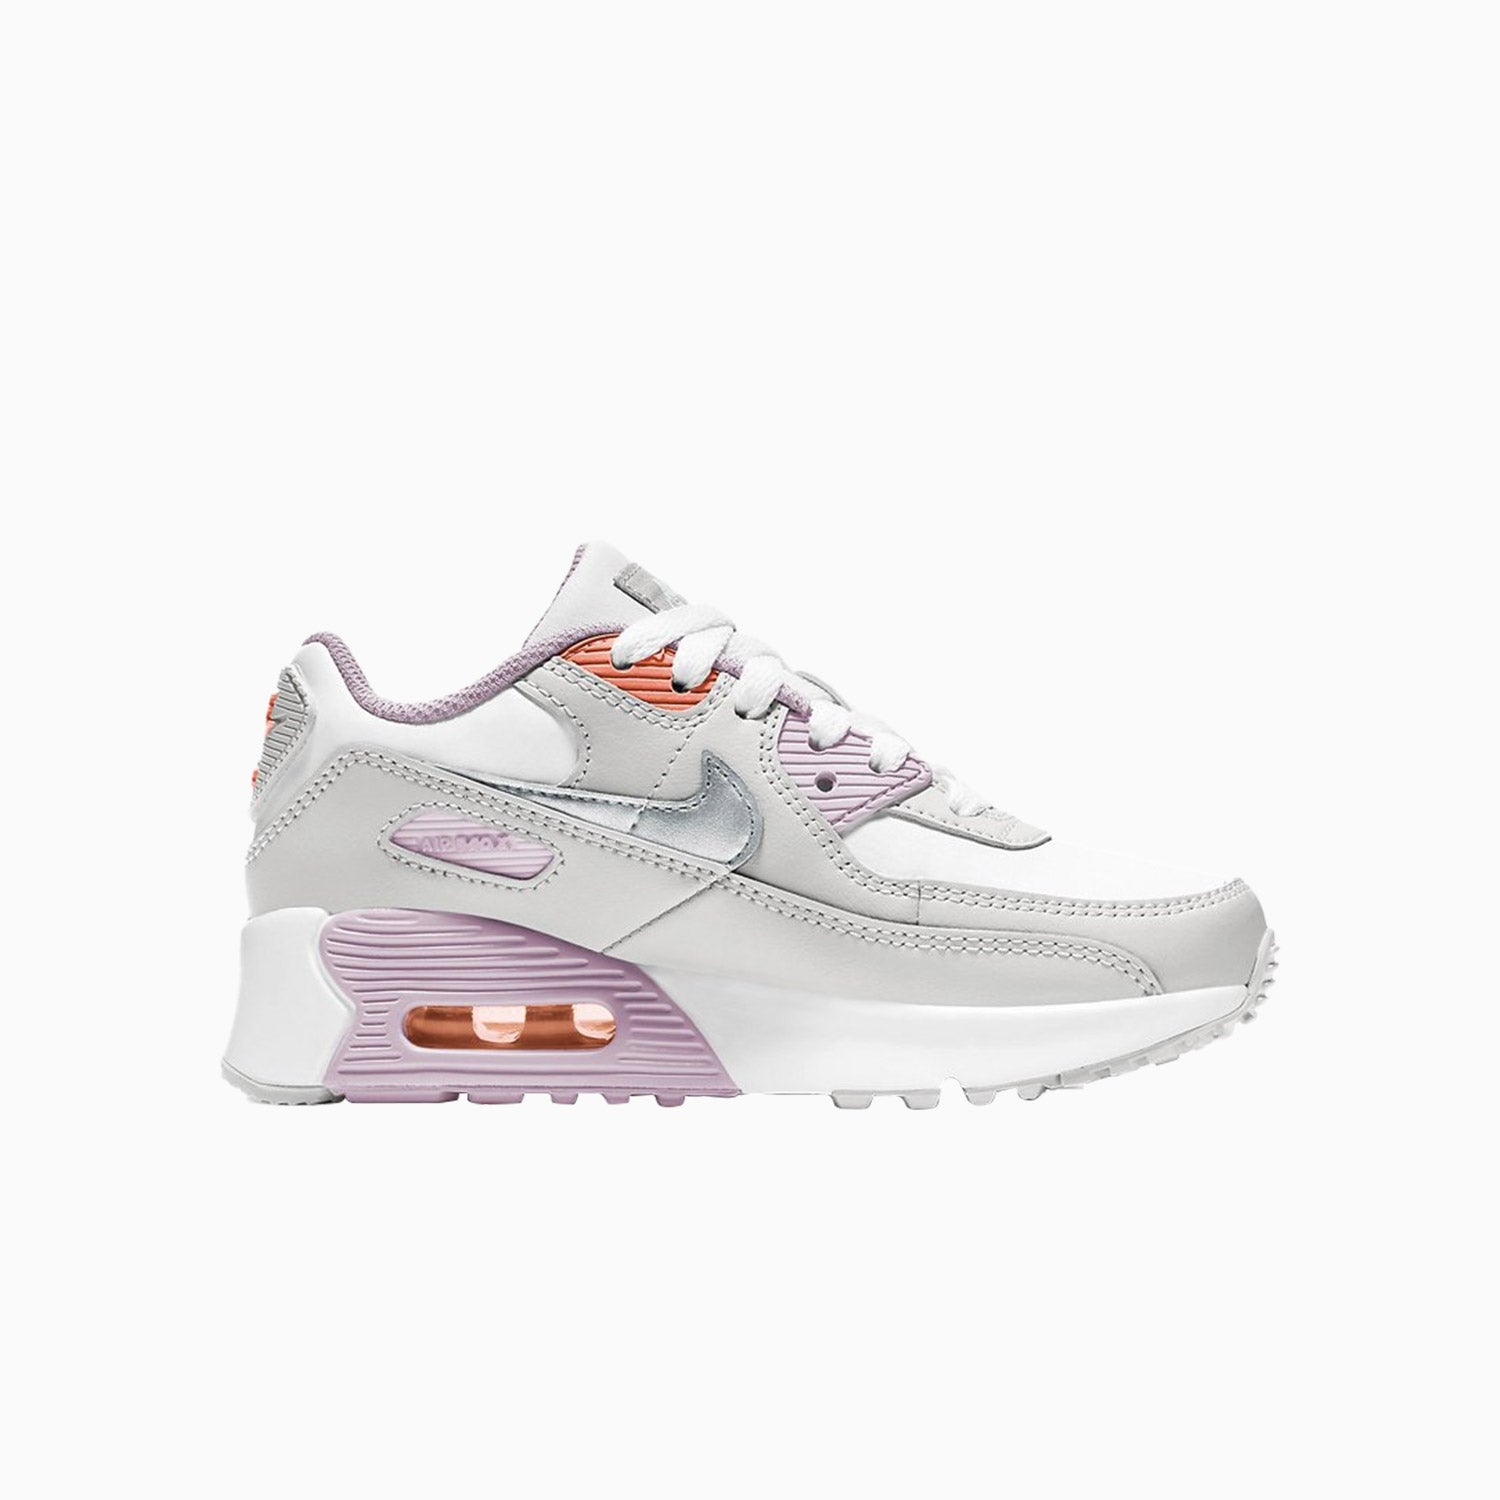 Kid's Nike Air Max 90 Preschool - Color: White Platinum Tint - Tops and Bottoms USA -